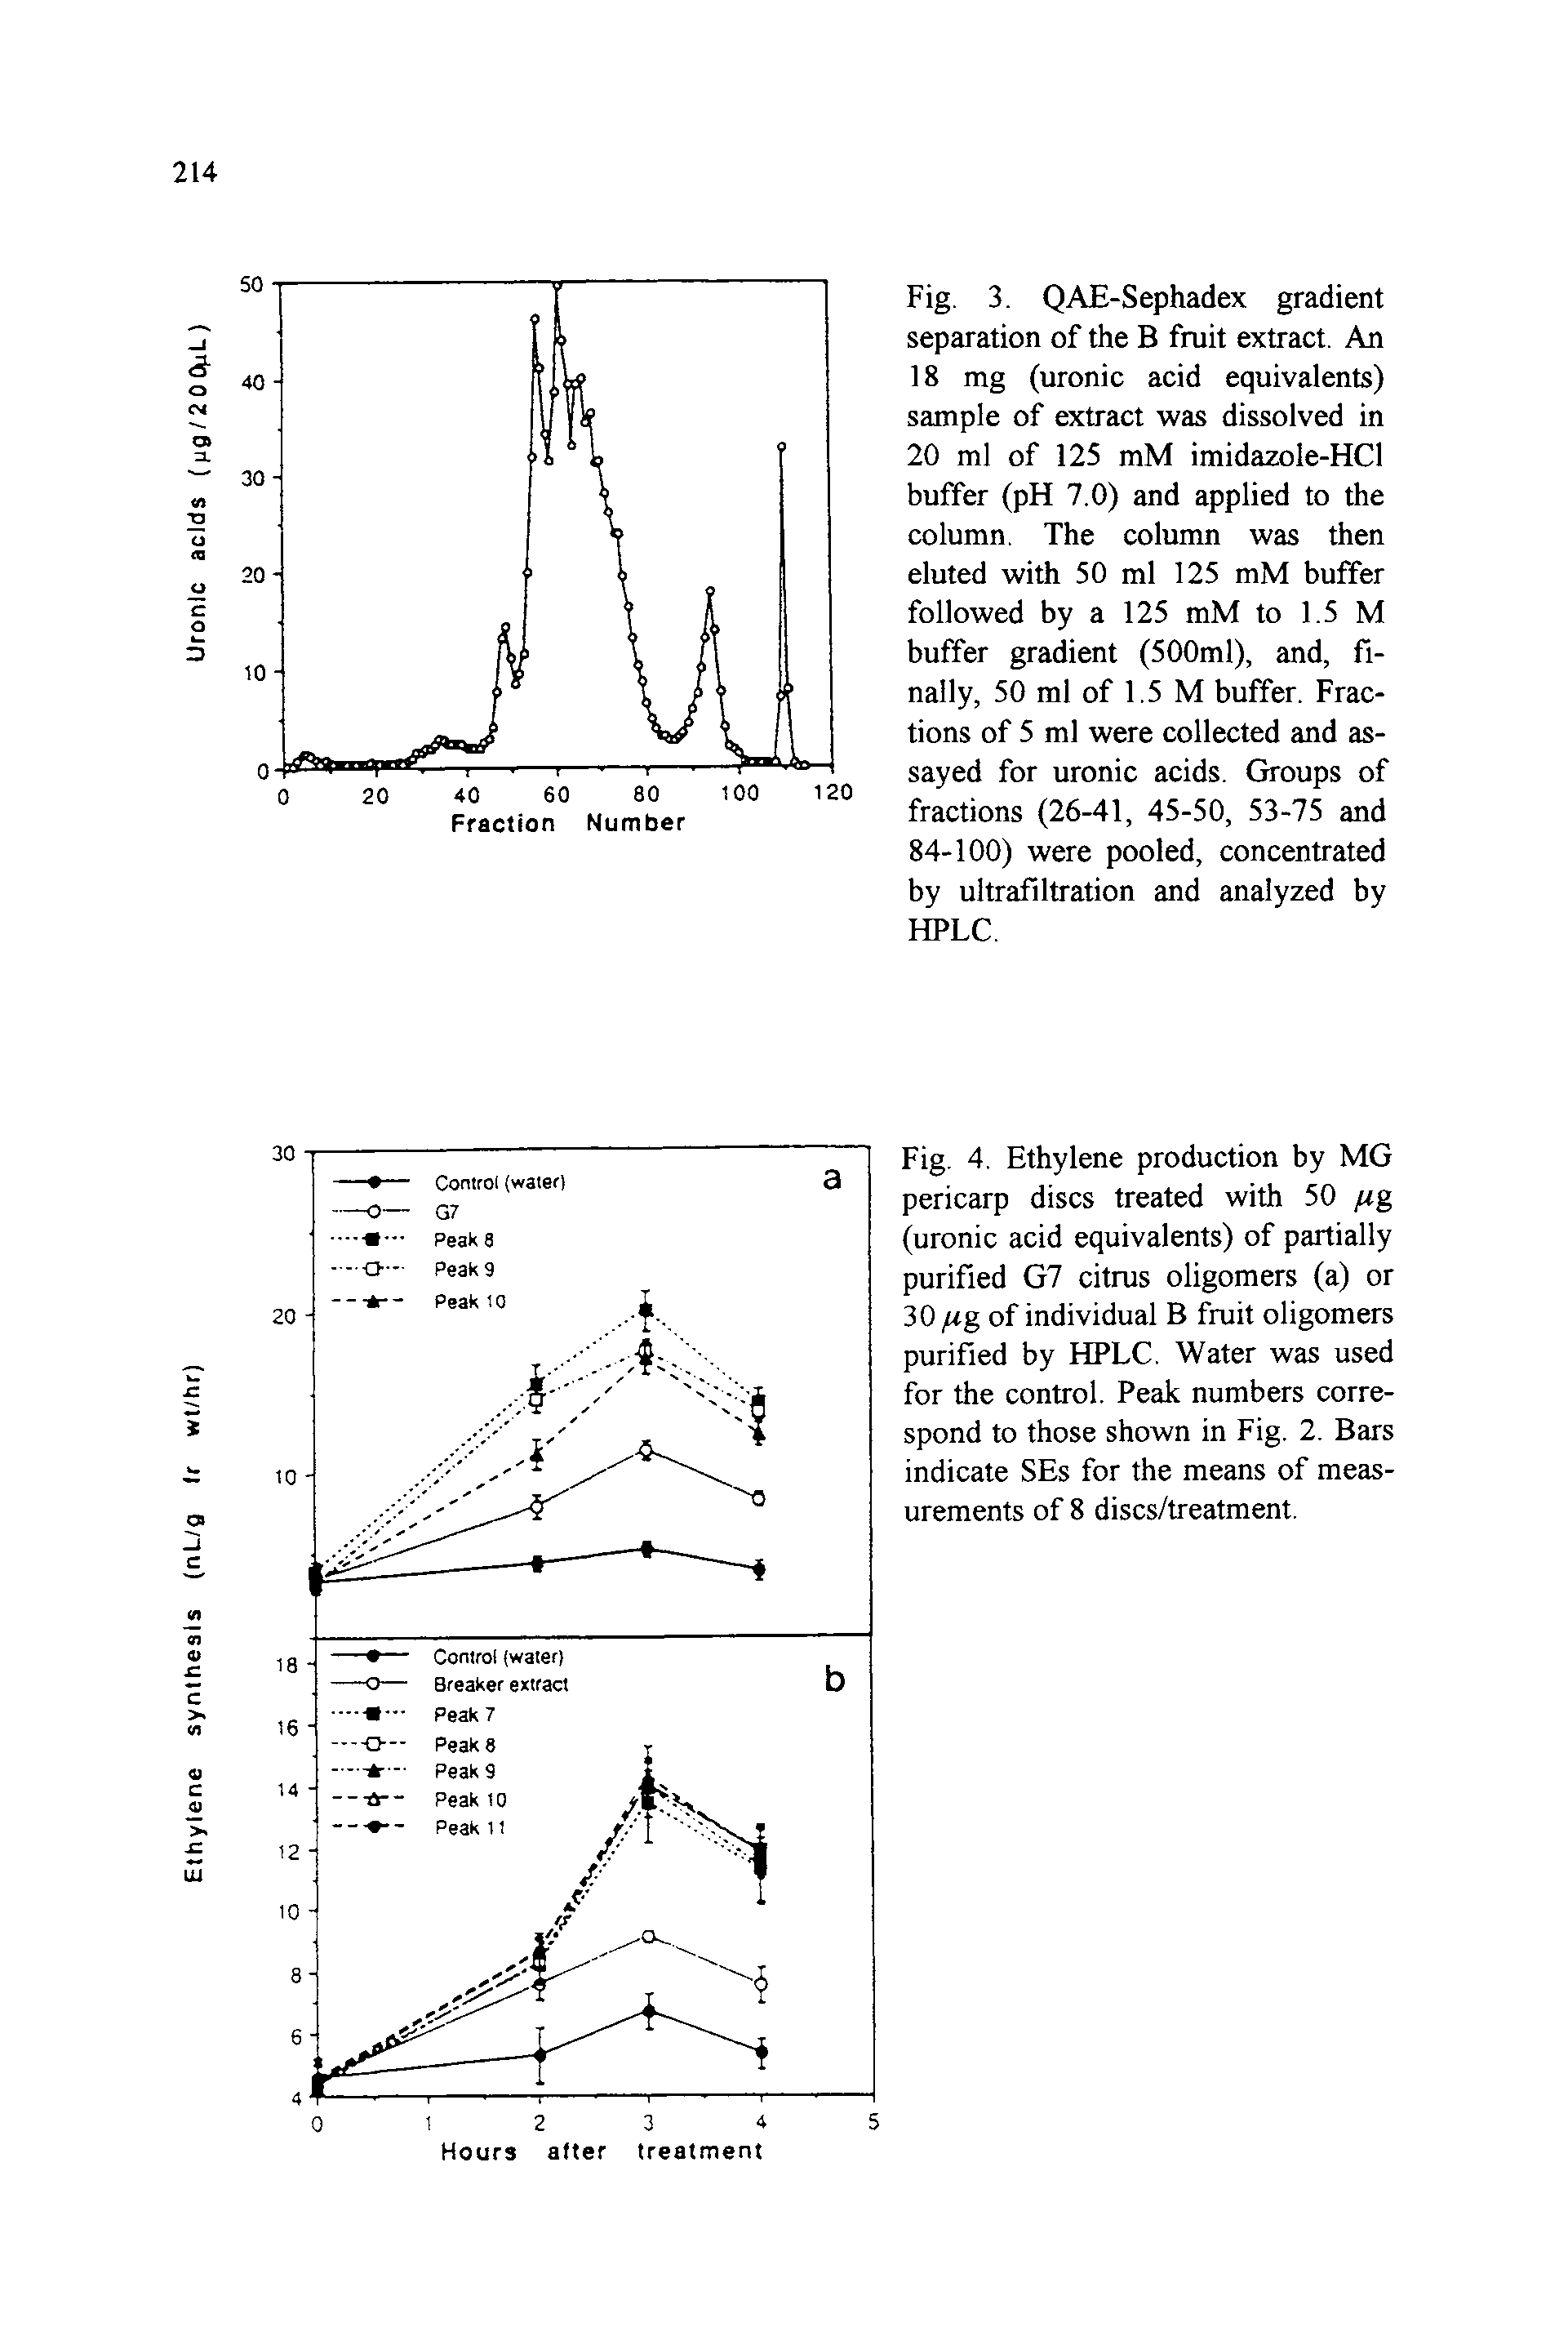 Fig. 3. QAE-Sephadex gradient separation of the B fruit extract. An 18 mg (uronic acid equivalents) sample of extract was dissolved in 20 ml of 125 mM imidazole-HCl buffer (pH 7.0) and applied to the column. The column was then eluted with 50 ml 125 mM buffer followed by a 125 mM to 1.5 M buffer gradient (500ml), and, finally, 50 ml of 1.5 M buffer. Fractions of 5 ml were collected and assayed for uronic acids. Groups of fractions (26-41, 45-50, 53-75 and 84-100) were pooled, concentrated by ultrafiltration and analyzed by HPLC.